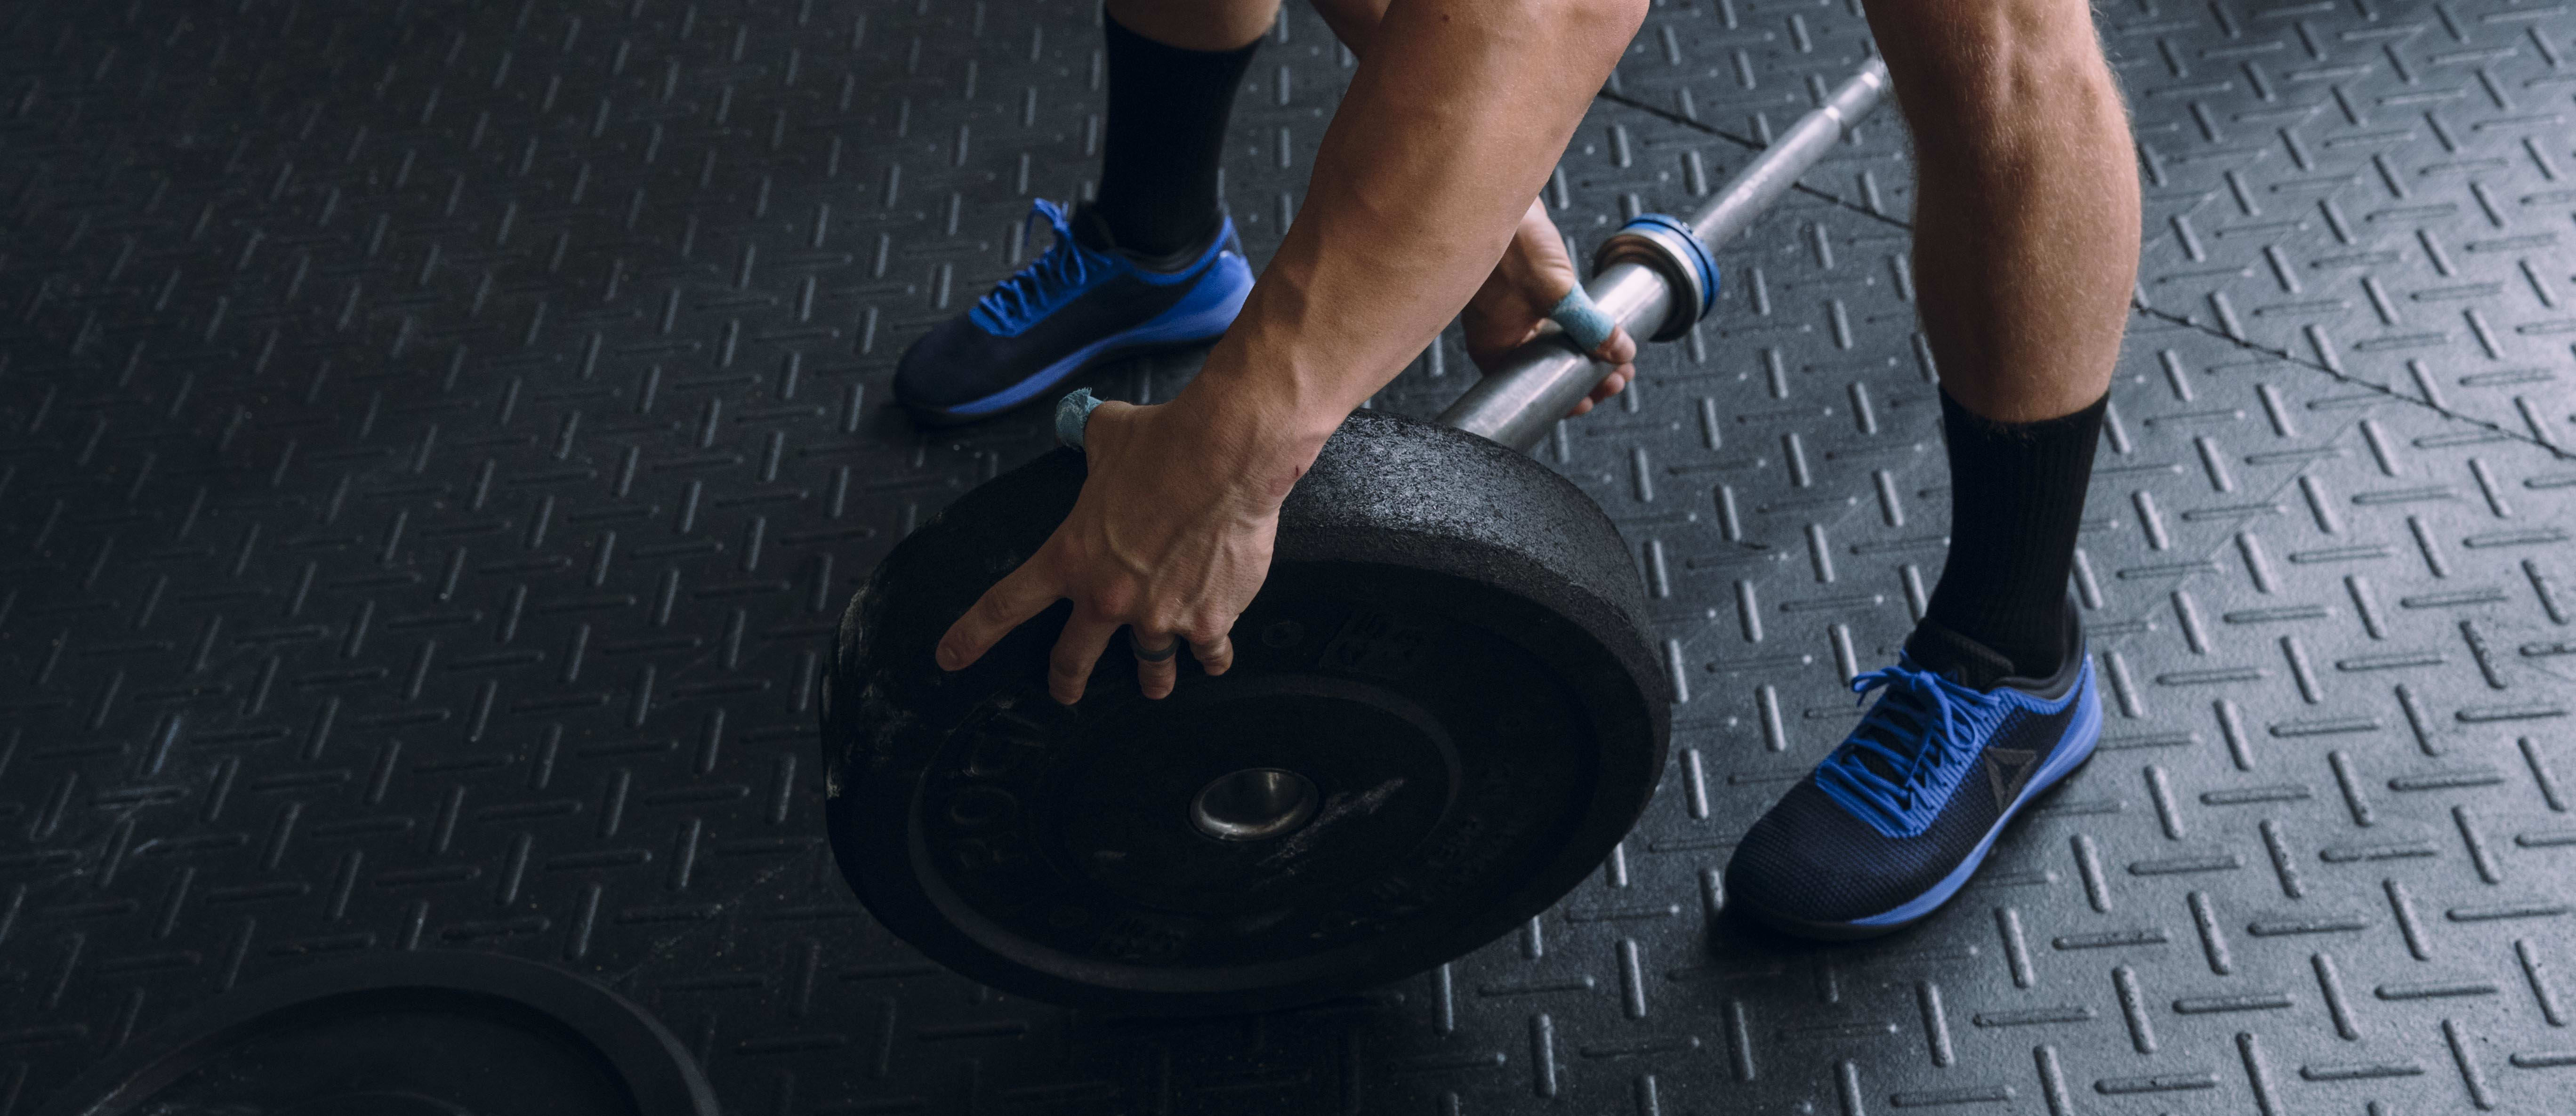 best shoes for crossfit 2019